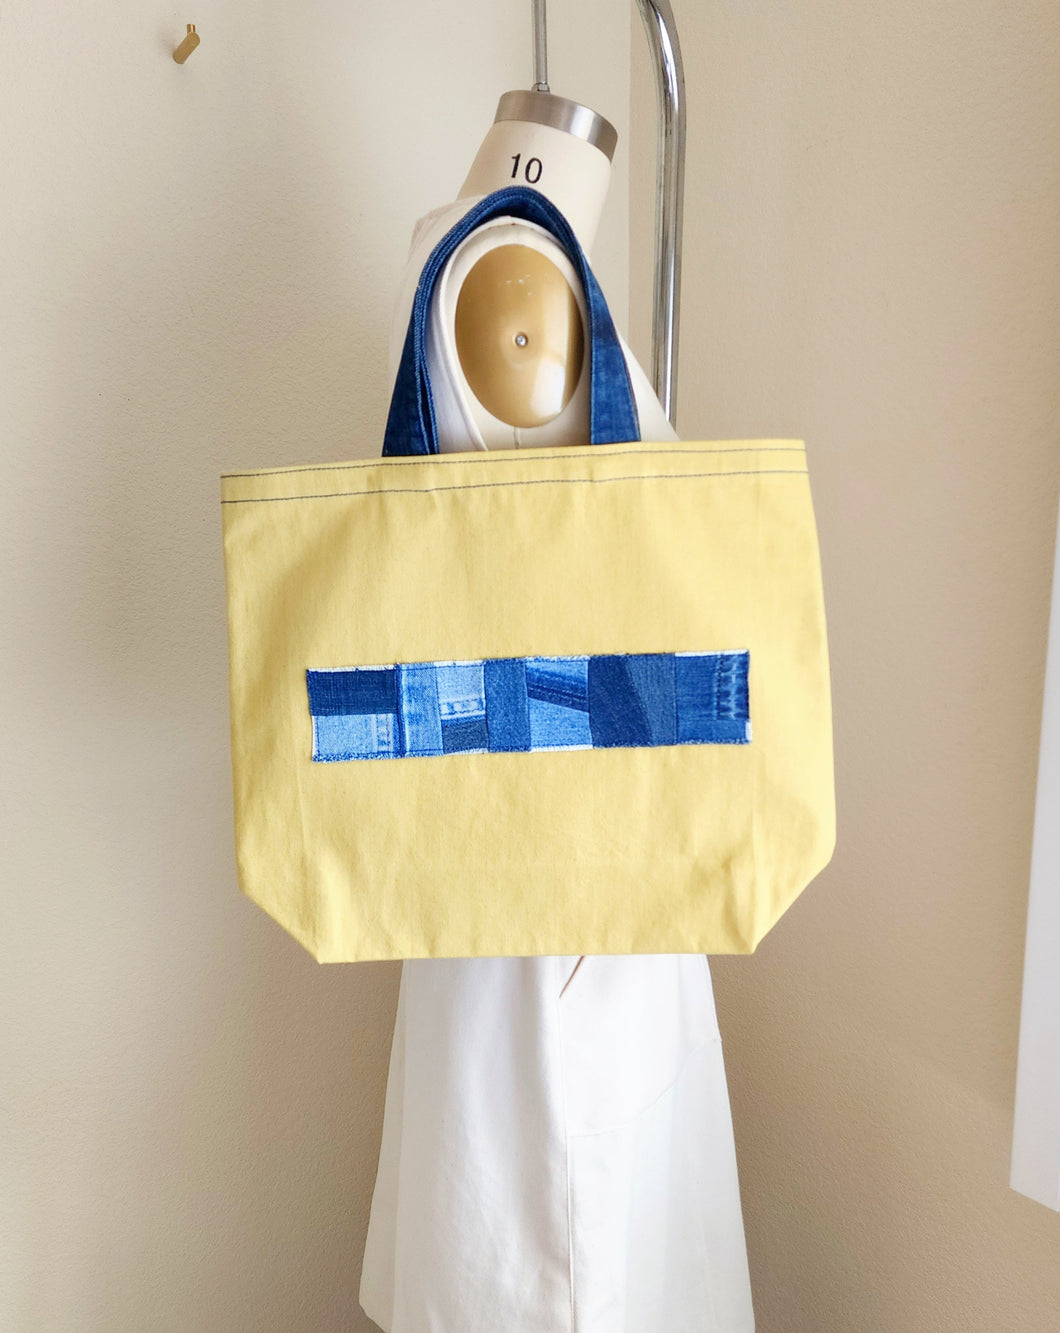 Large yellow denim tote bag with patchwork blue denim band on the front for decor. Blue denim waist band as handles.